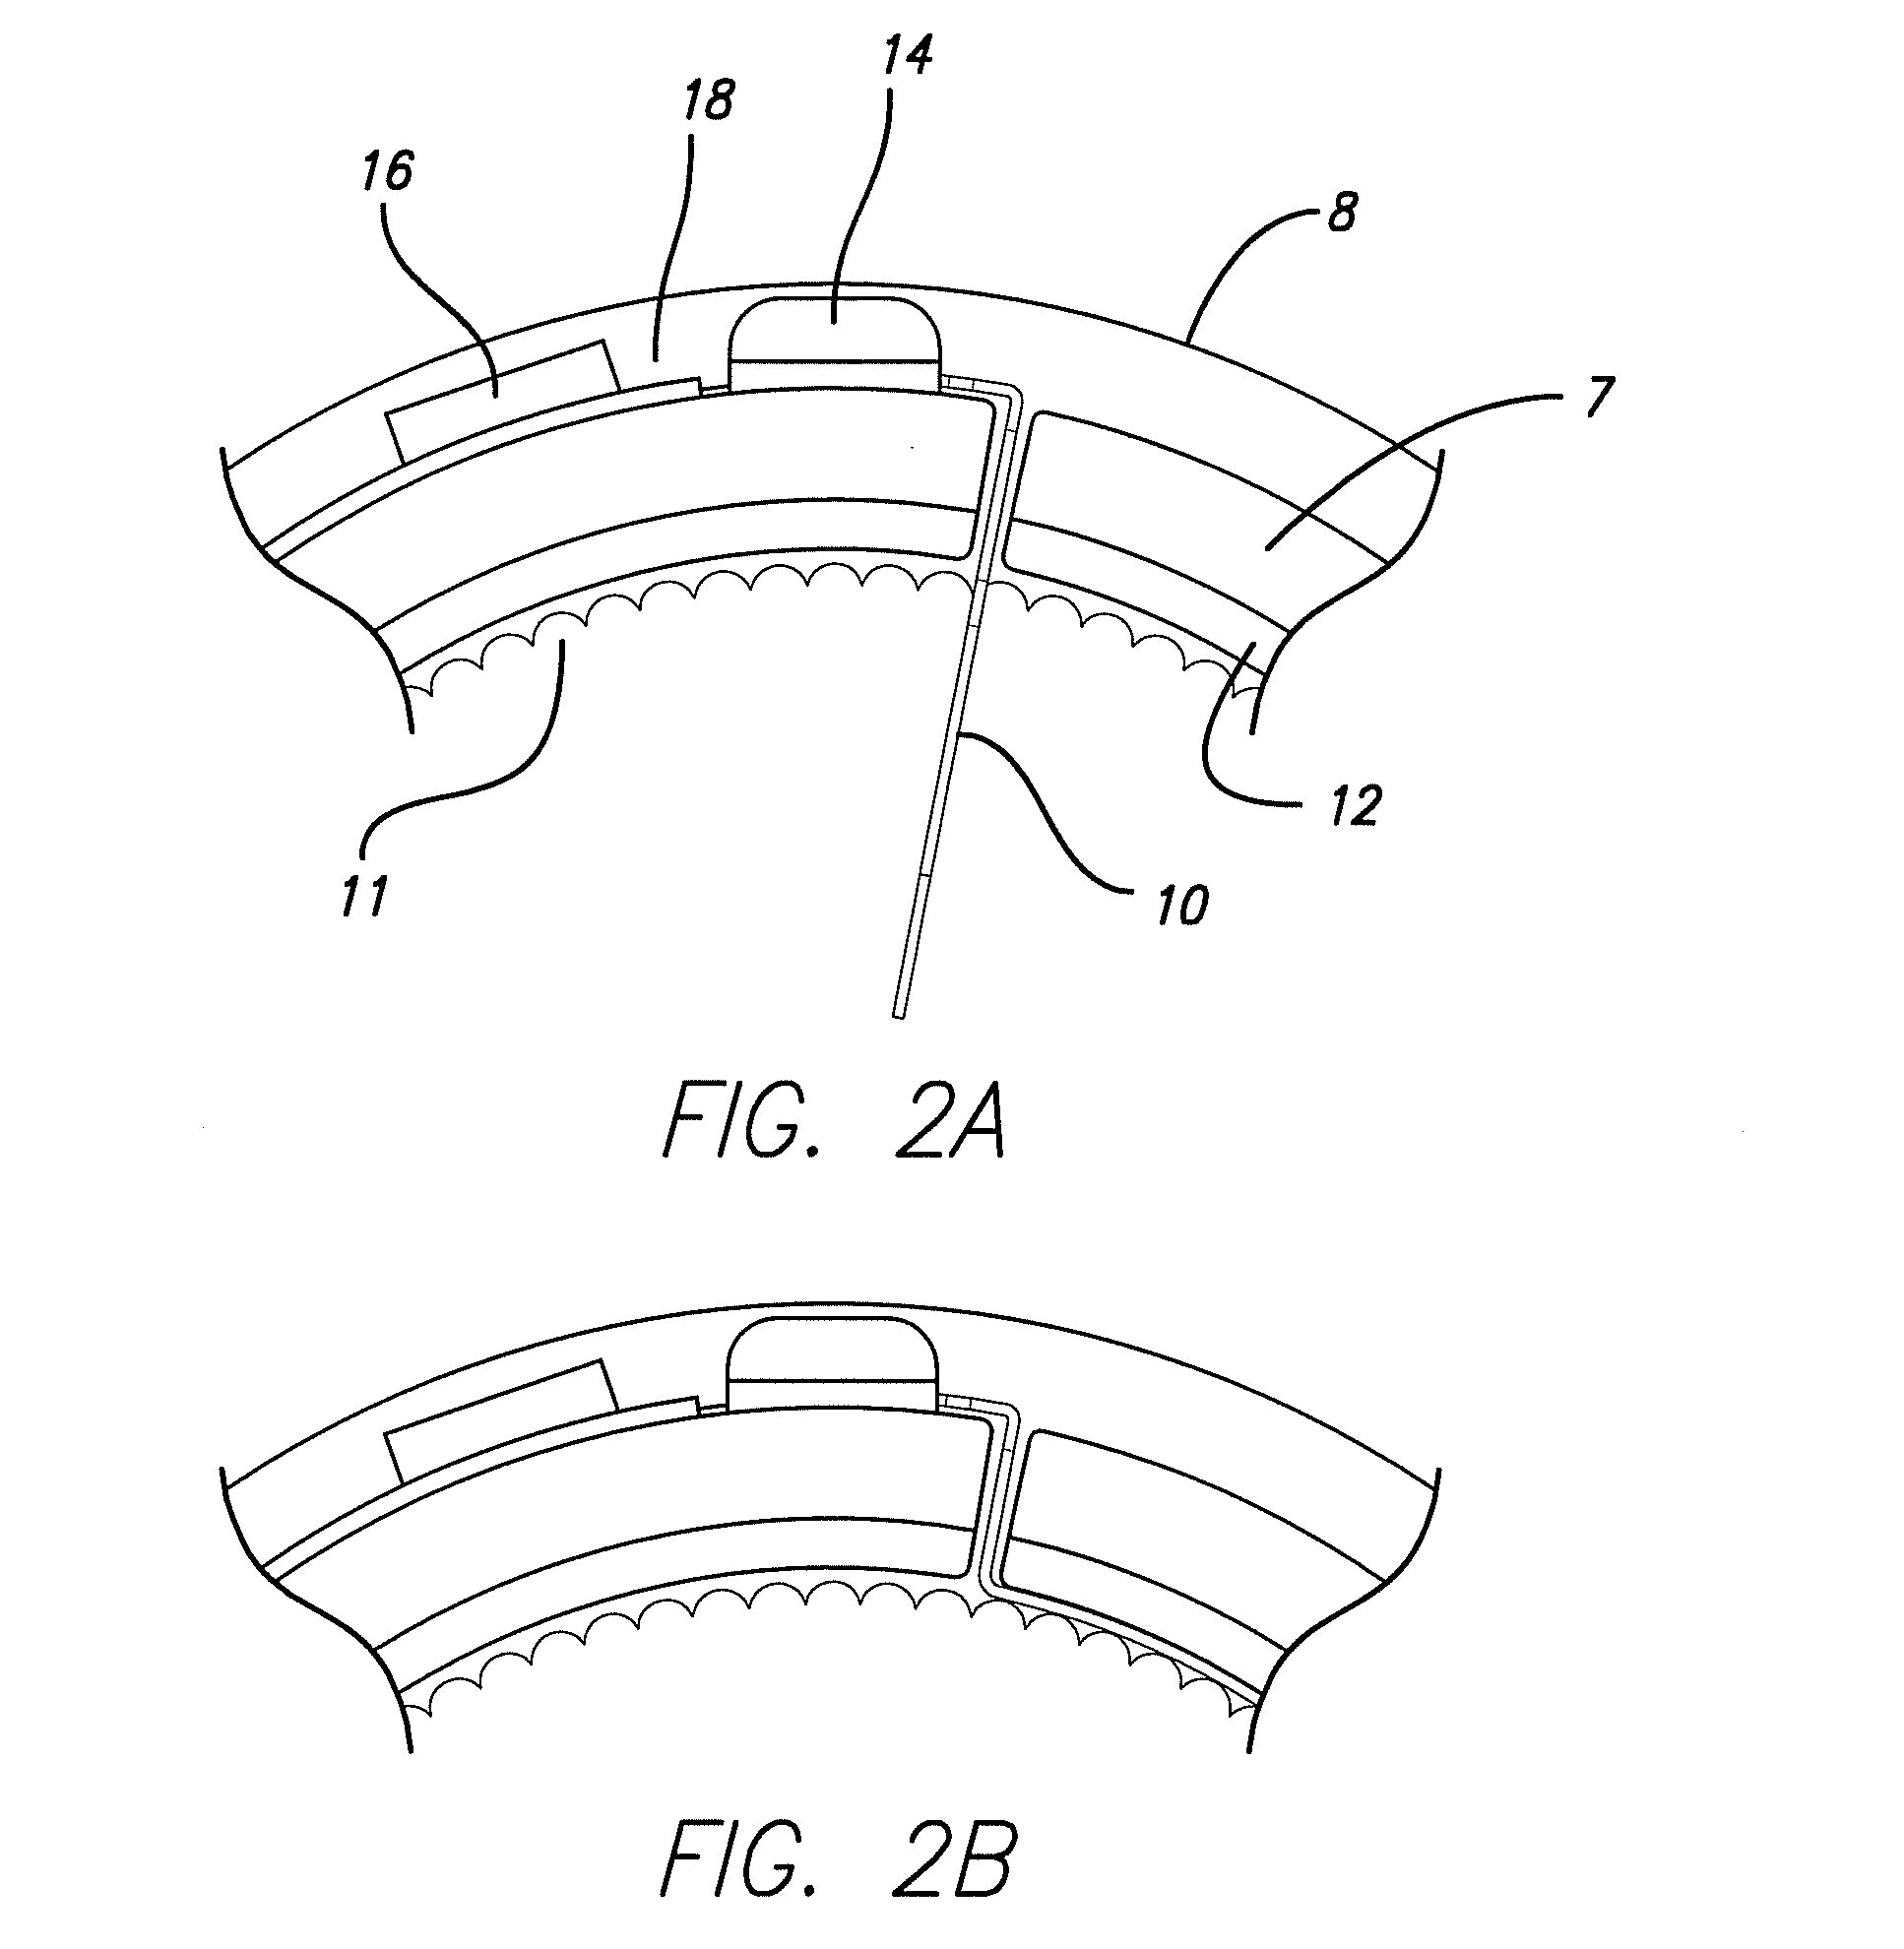 Cortical Implant System for Brain Stimulation and Recording